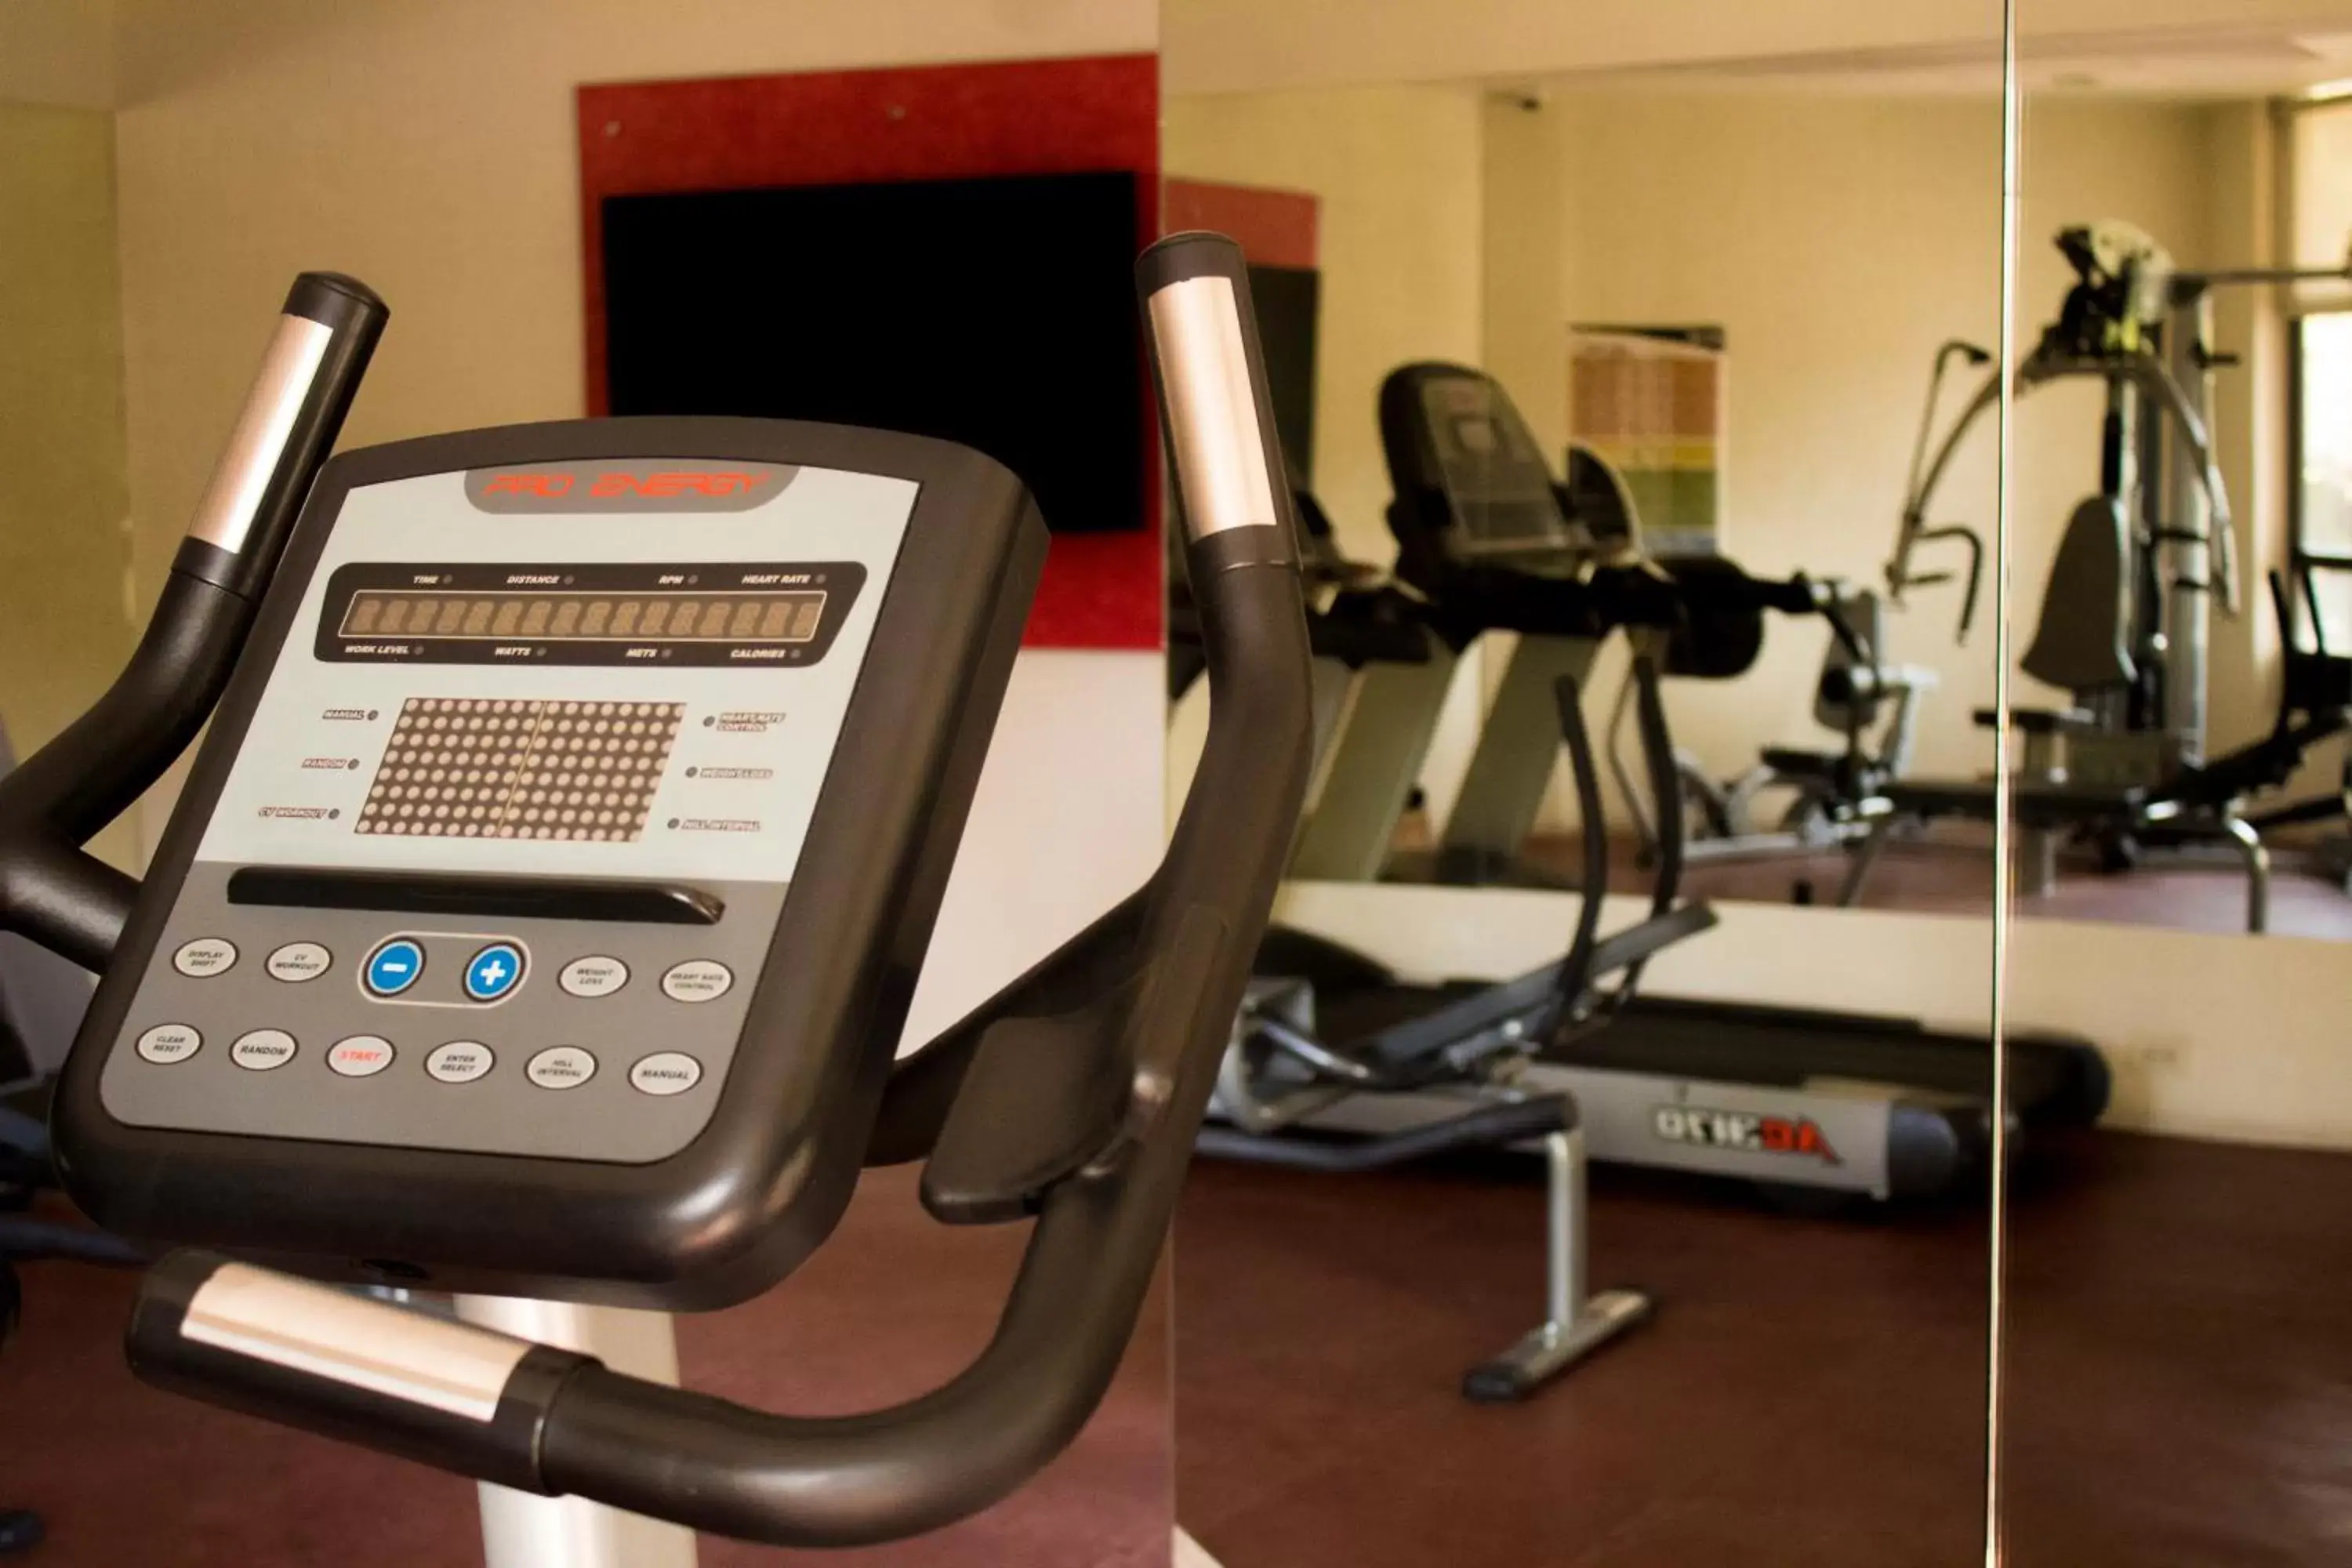 Fitness centre/facilities, Fitness Center/Facilities in Hotel Mirabel